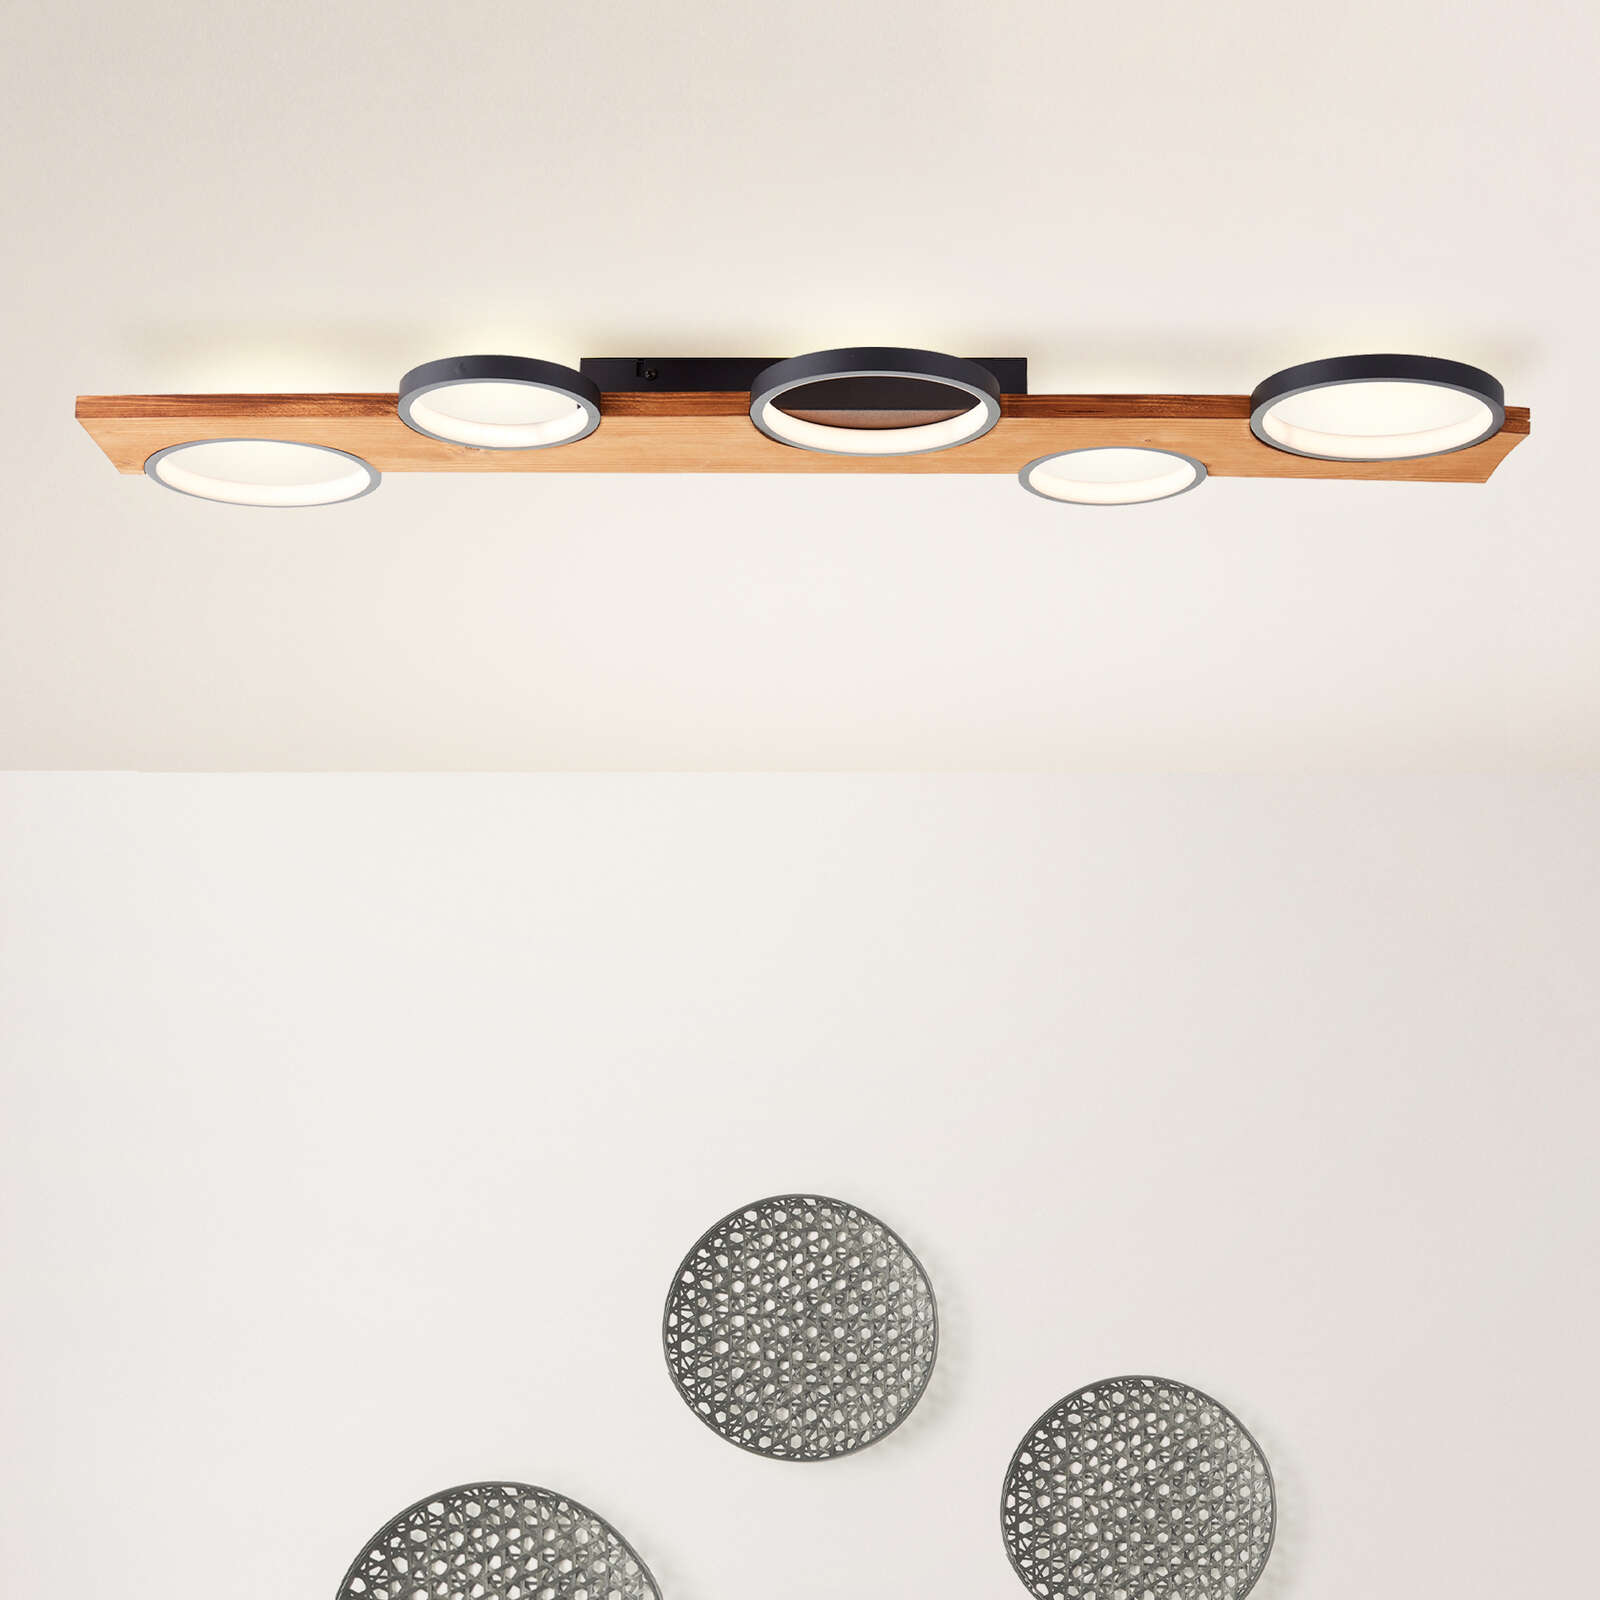             Wooden ceiling light - Lore - Brown
        